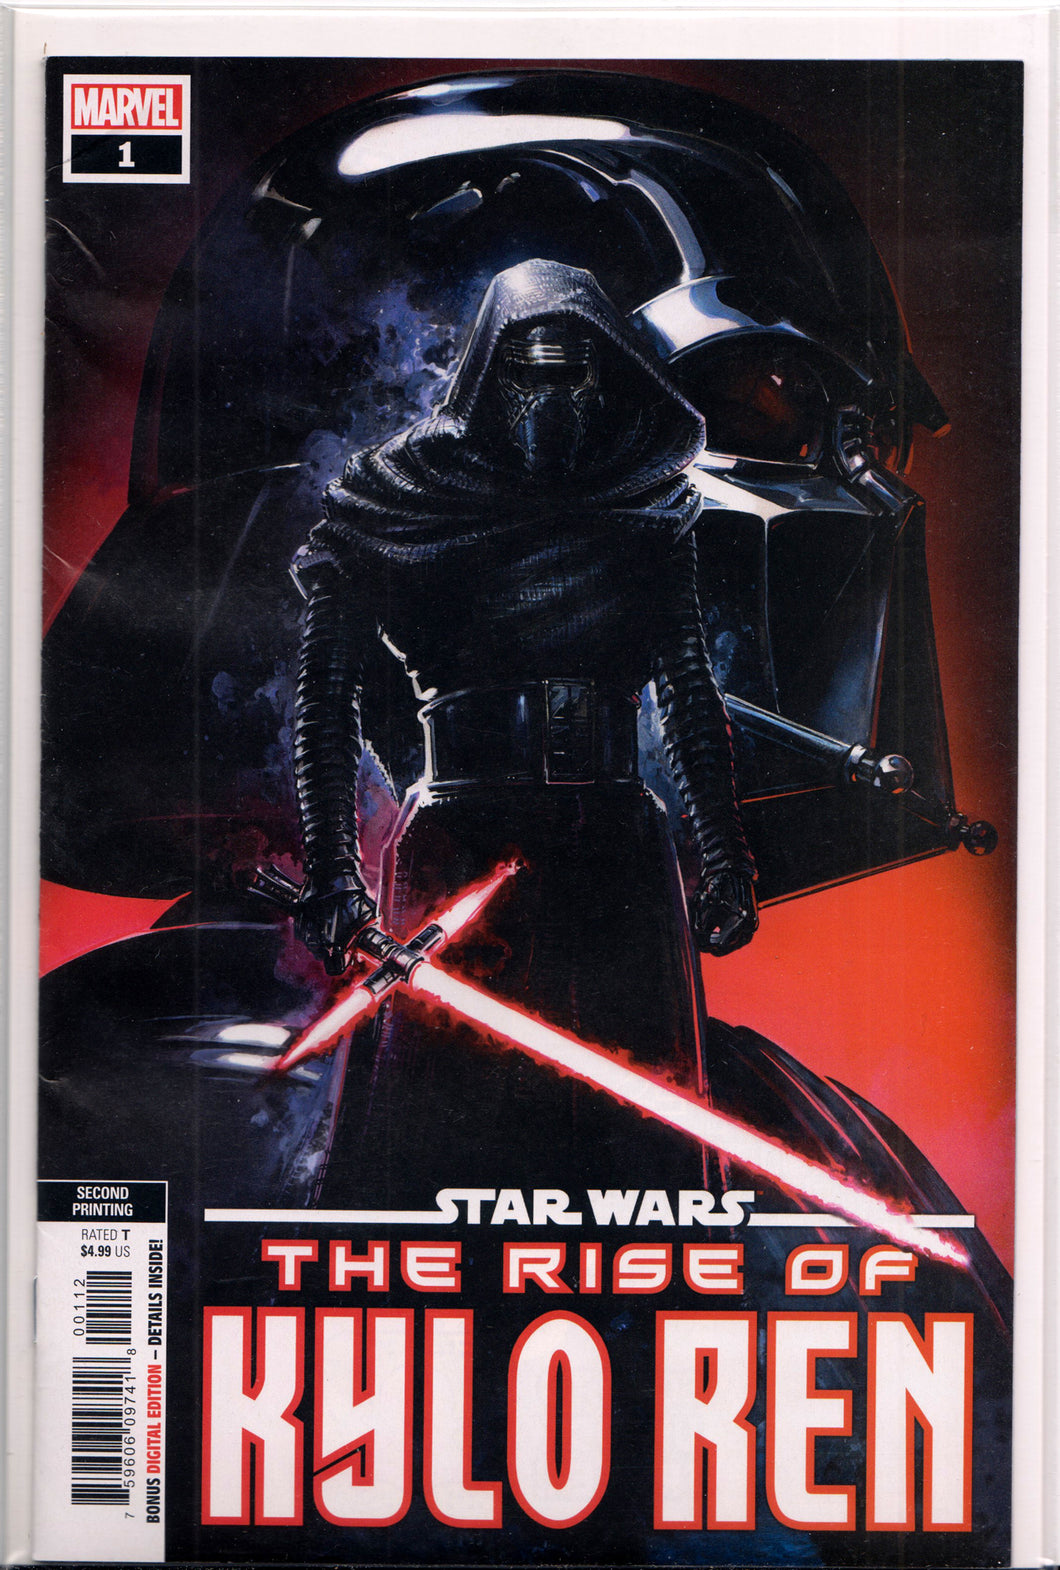 STAR WARS: THE RISE OF KYLO REN #1 (2ND PRINT VARIANT) COMIC BOOK ~ Marvel Comics